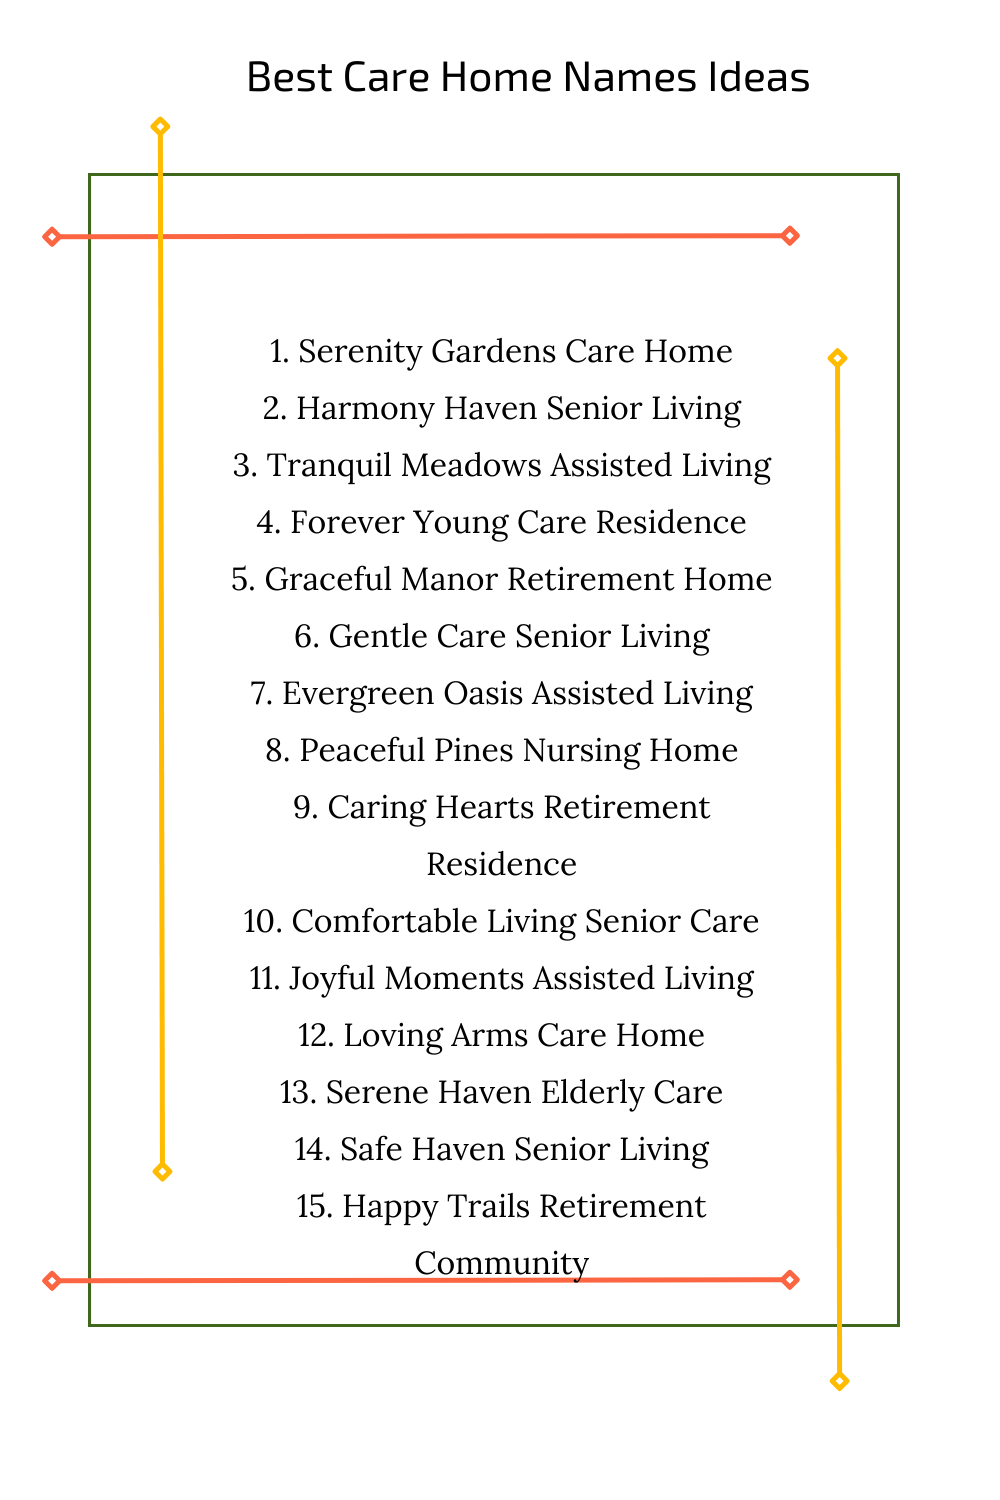 Best Care Home Names Ideas